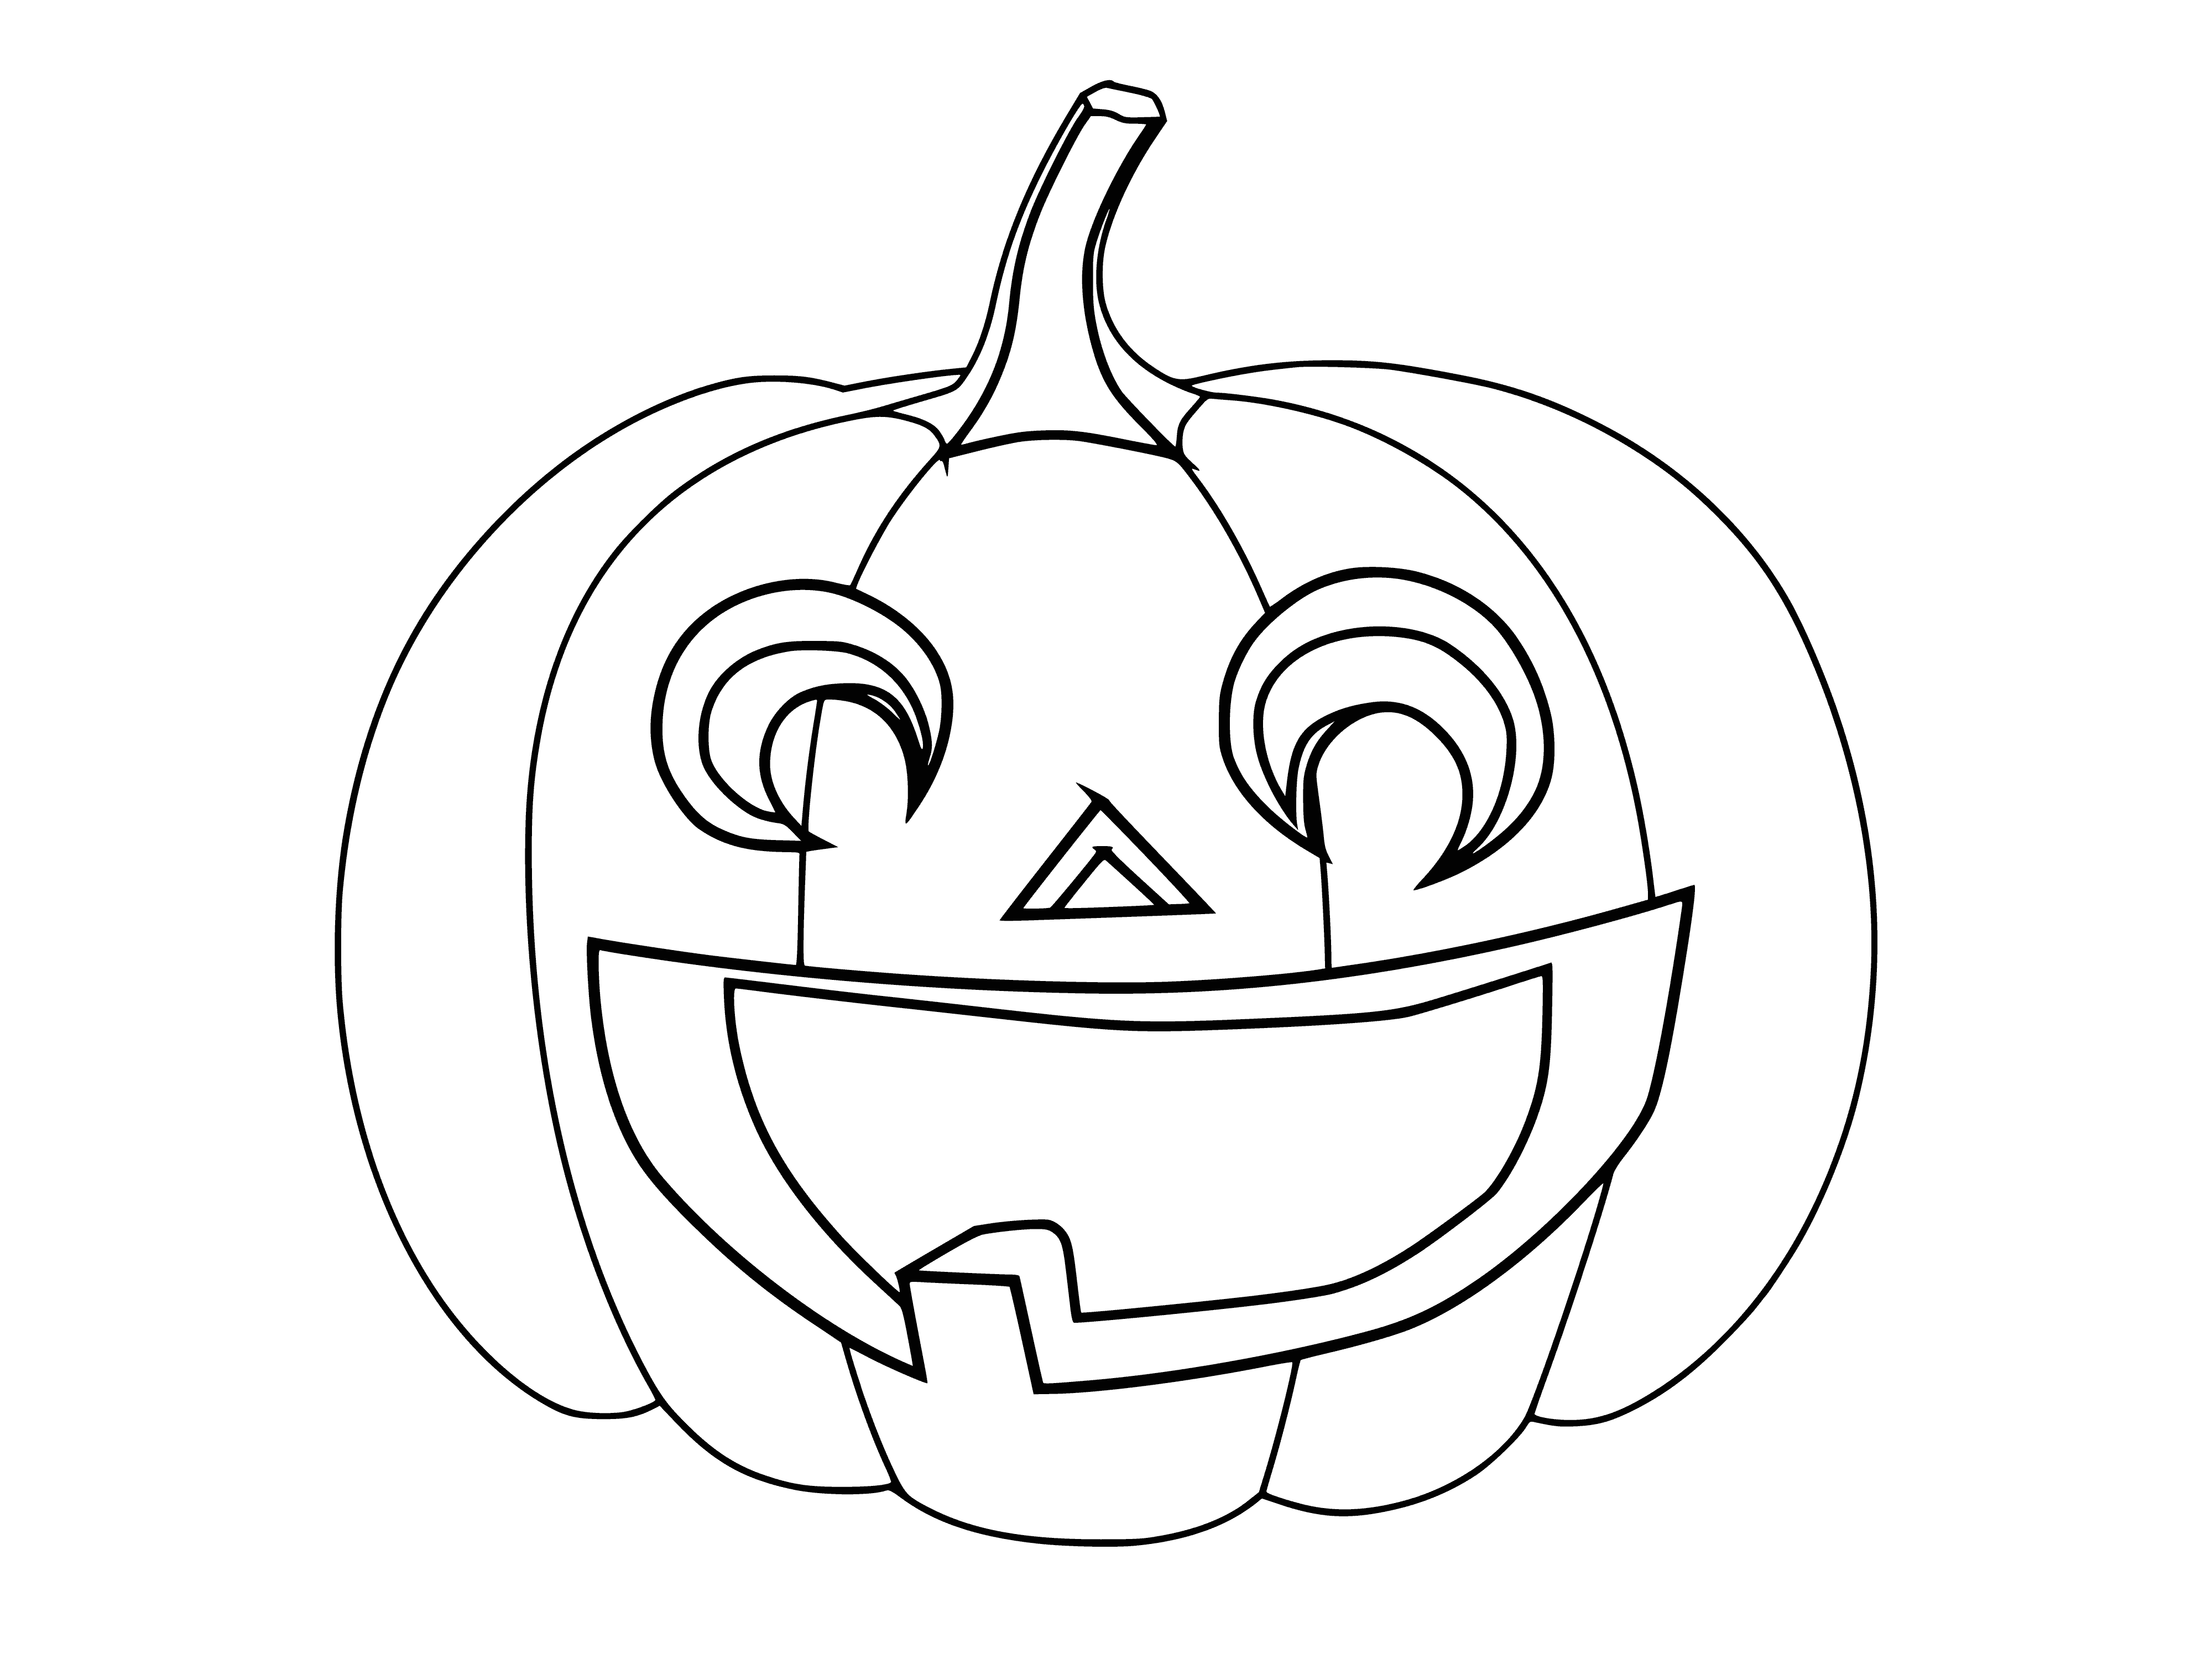 coloring page: A pumpkin is carved to look like a face with a big nose, two eyes, and an open mouth yelling.